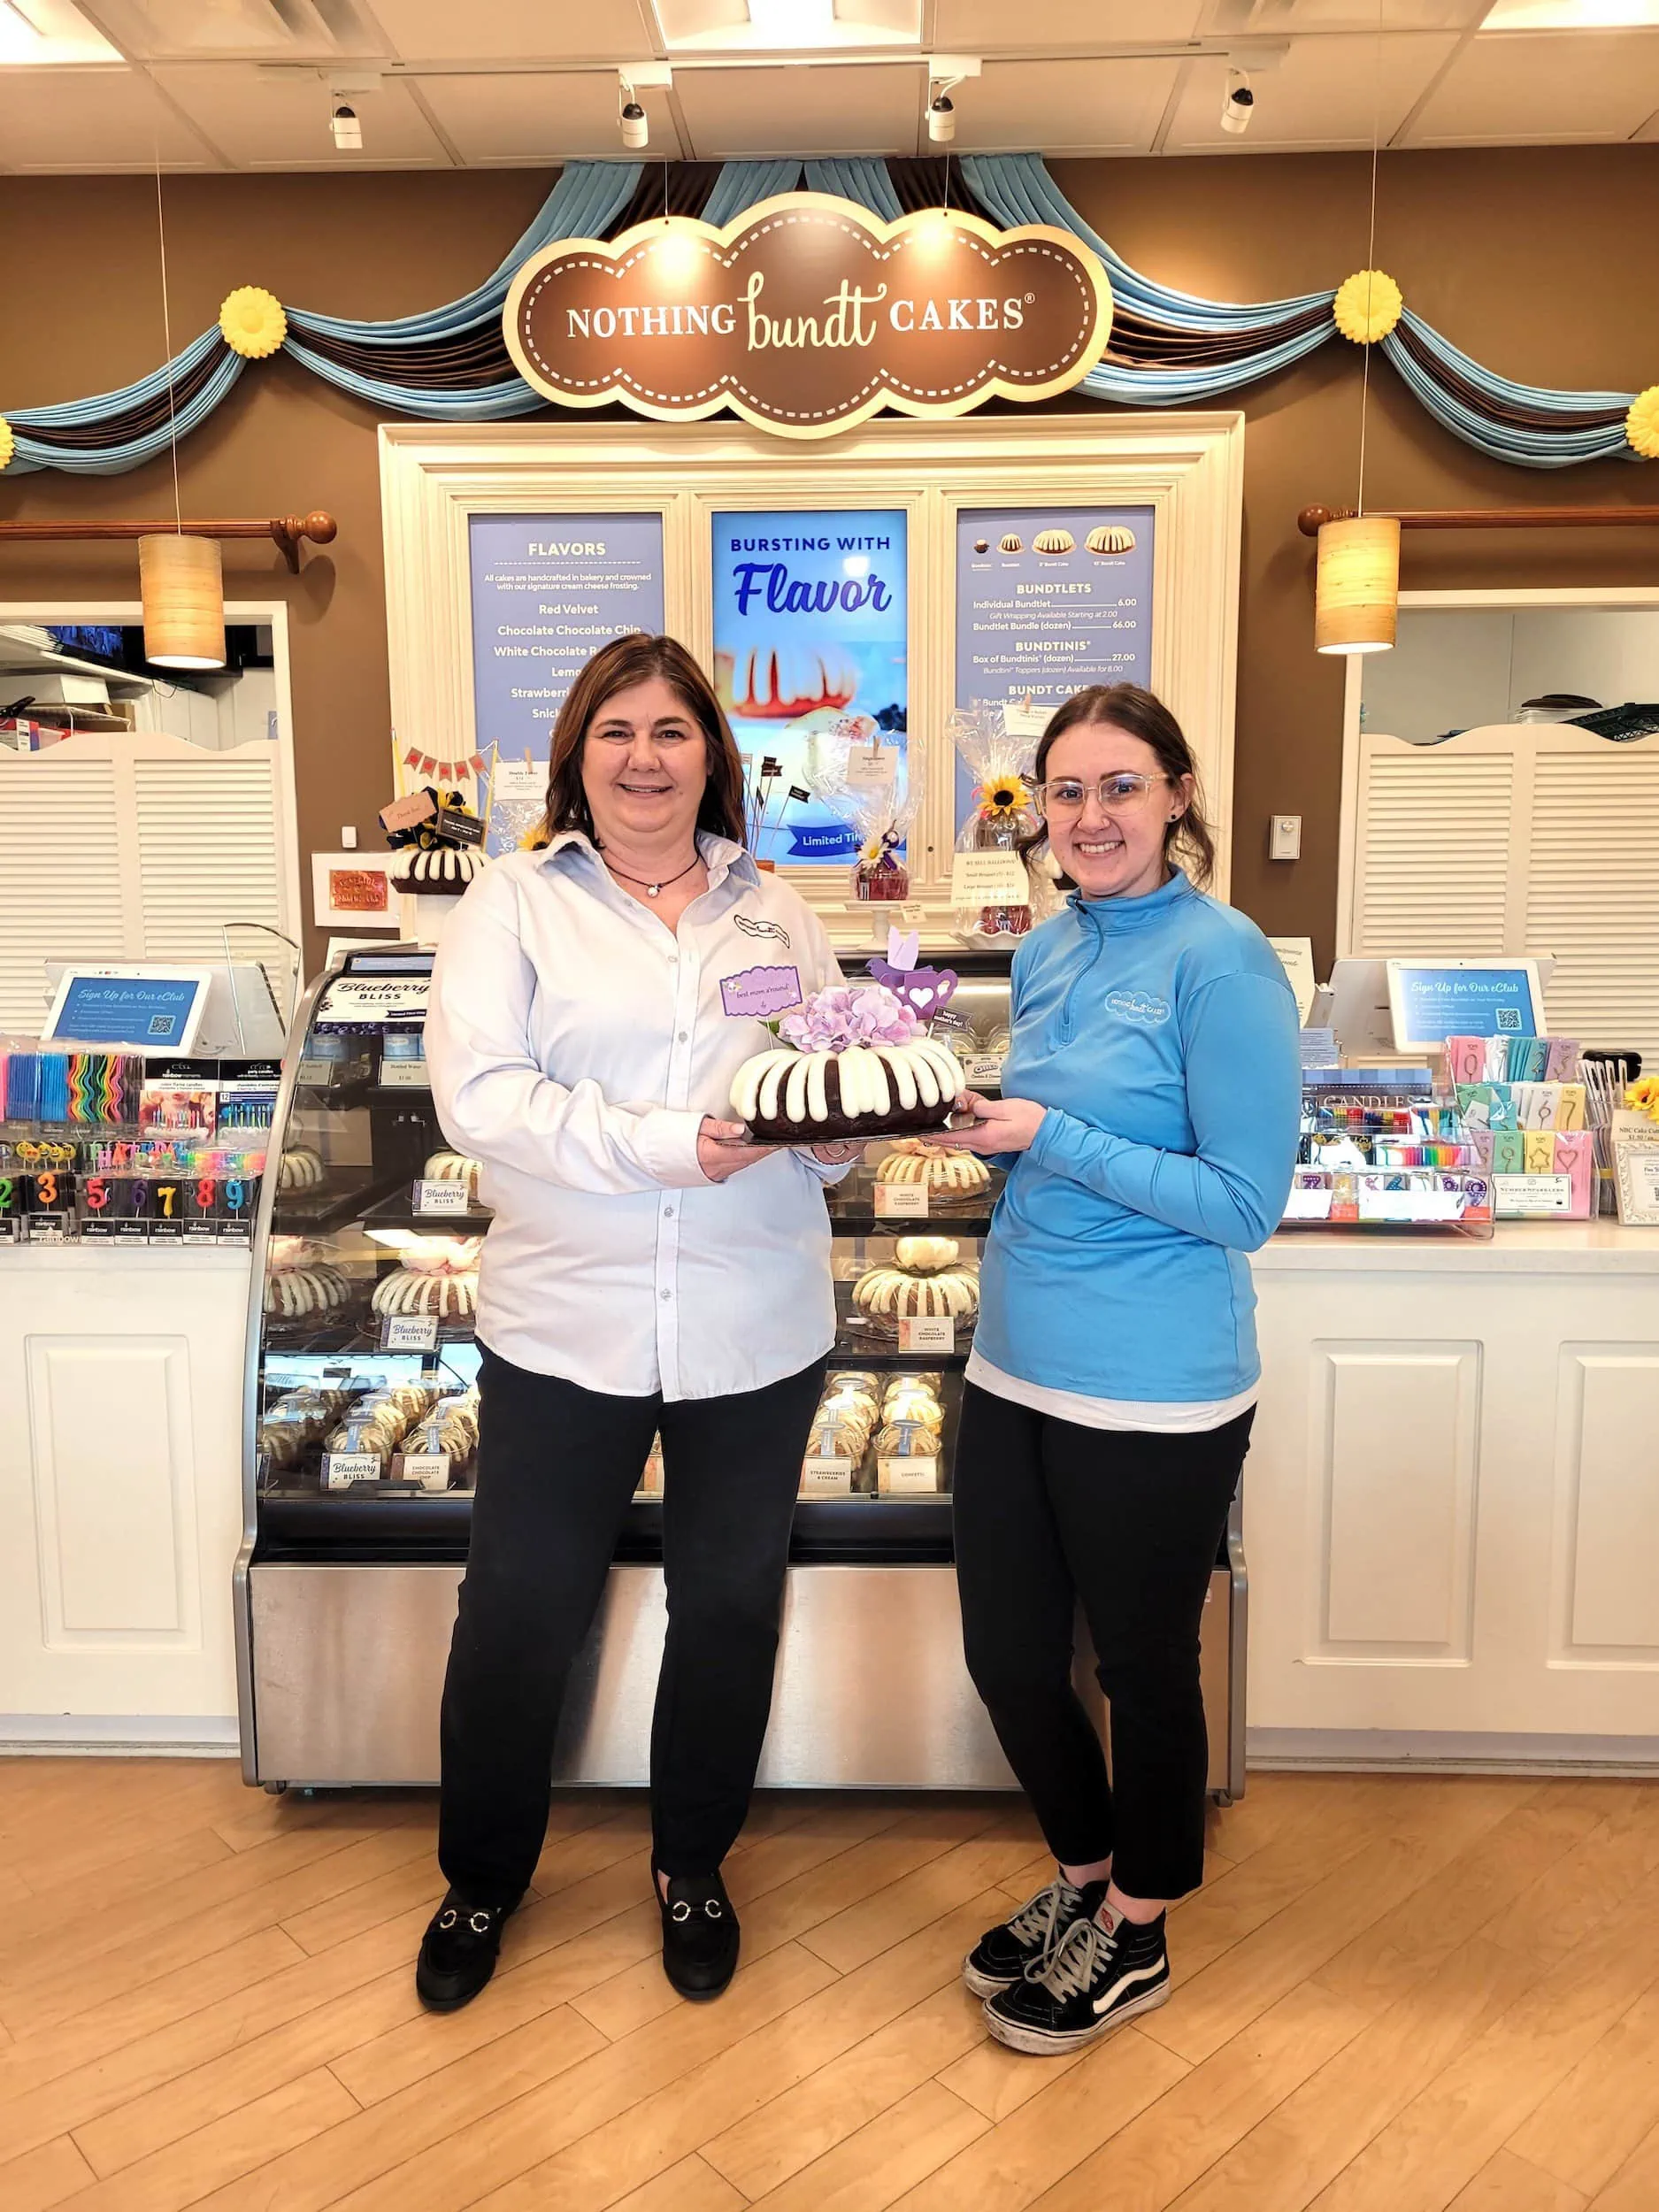 Cakes and community are priorities at Nothing Bundt Cakes